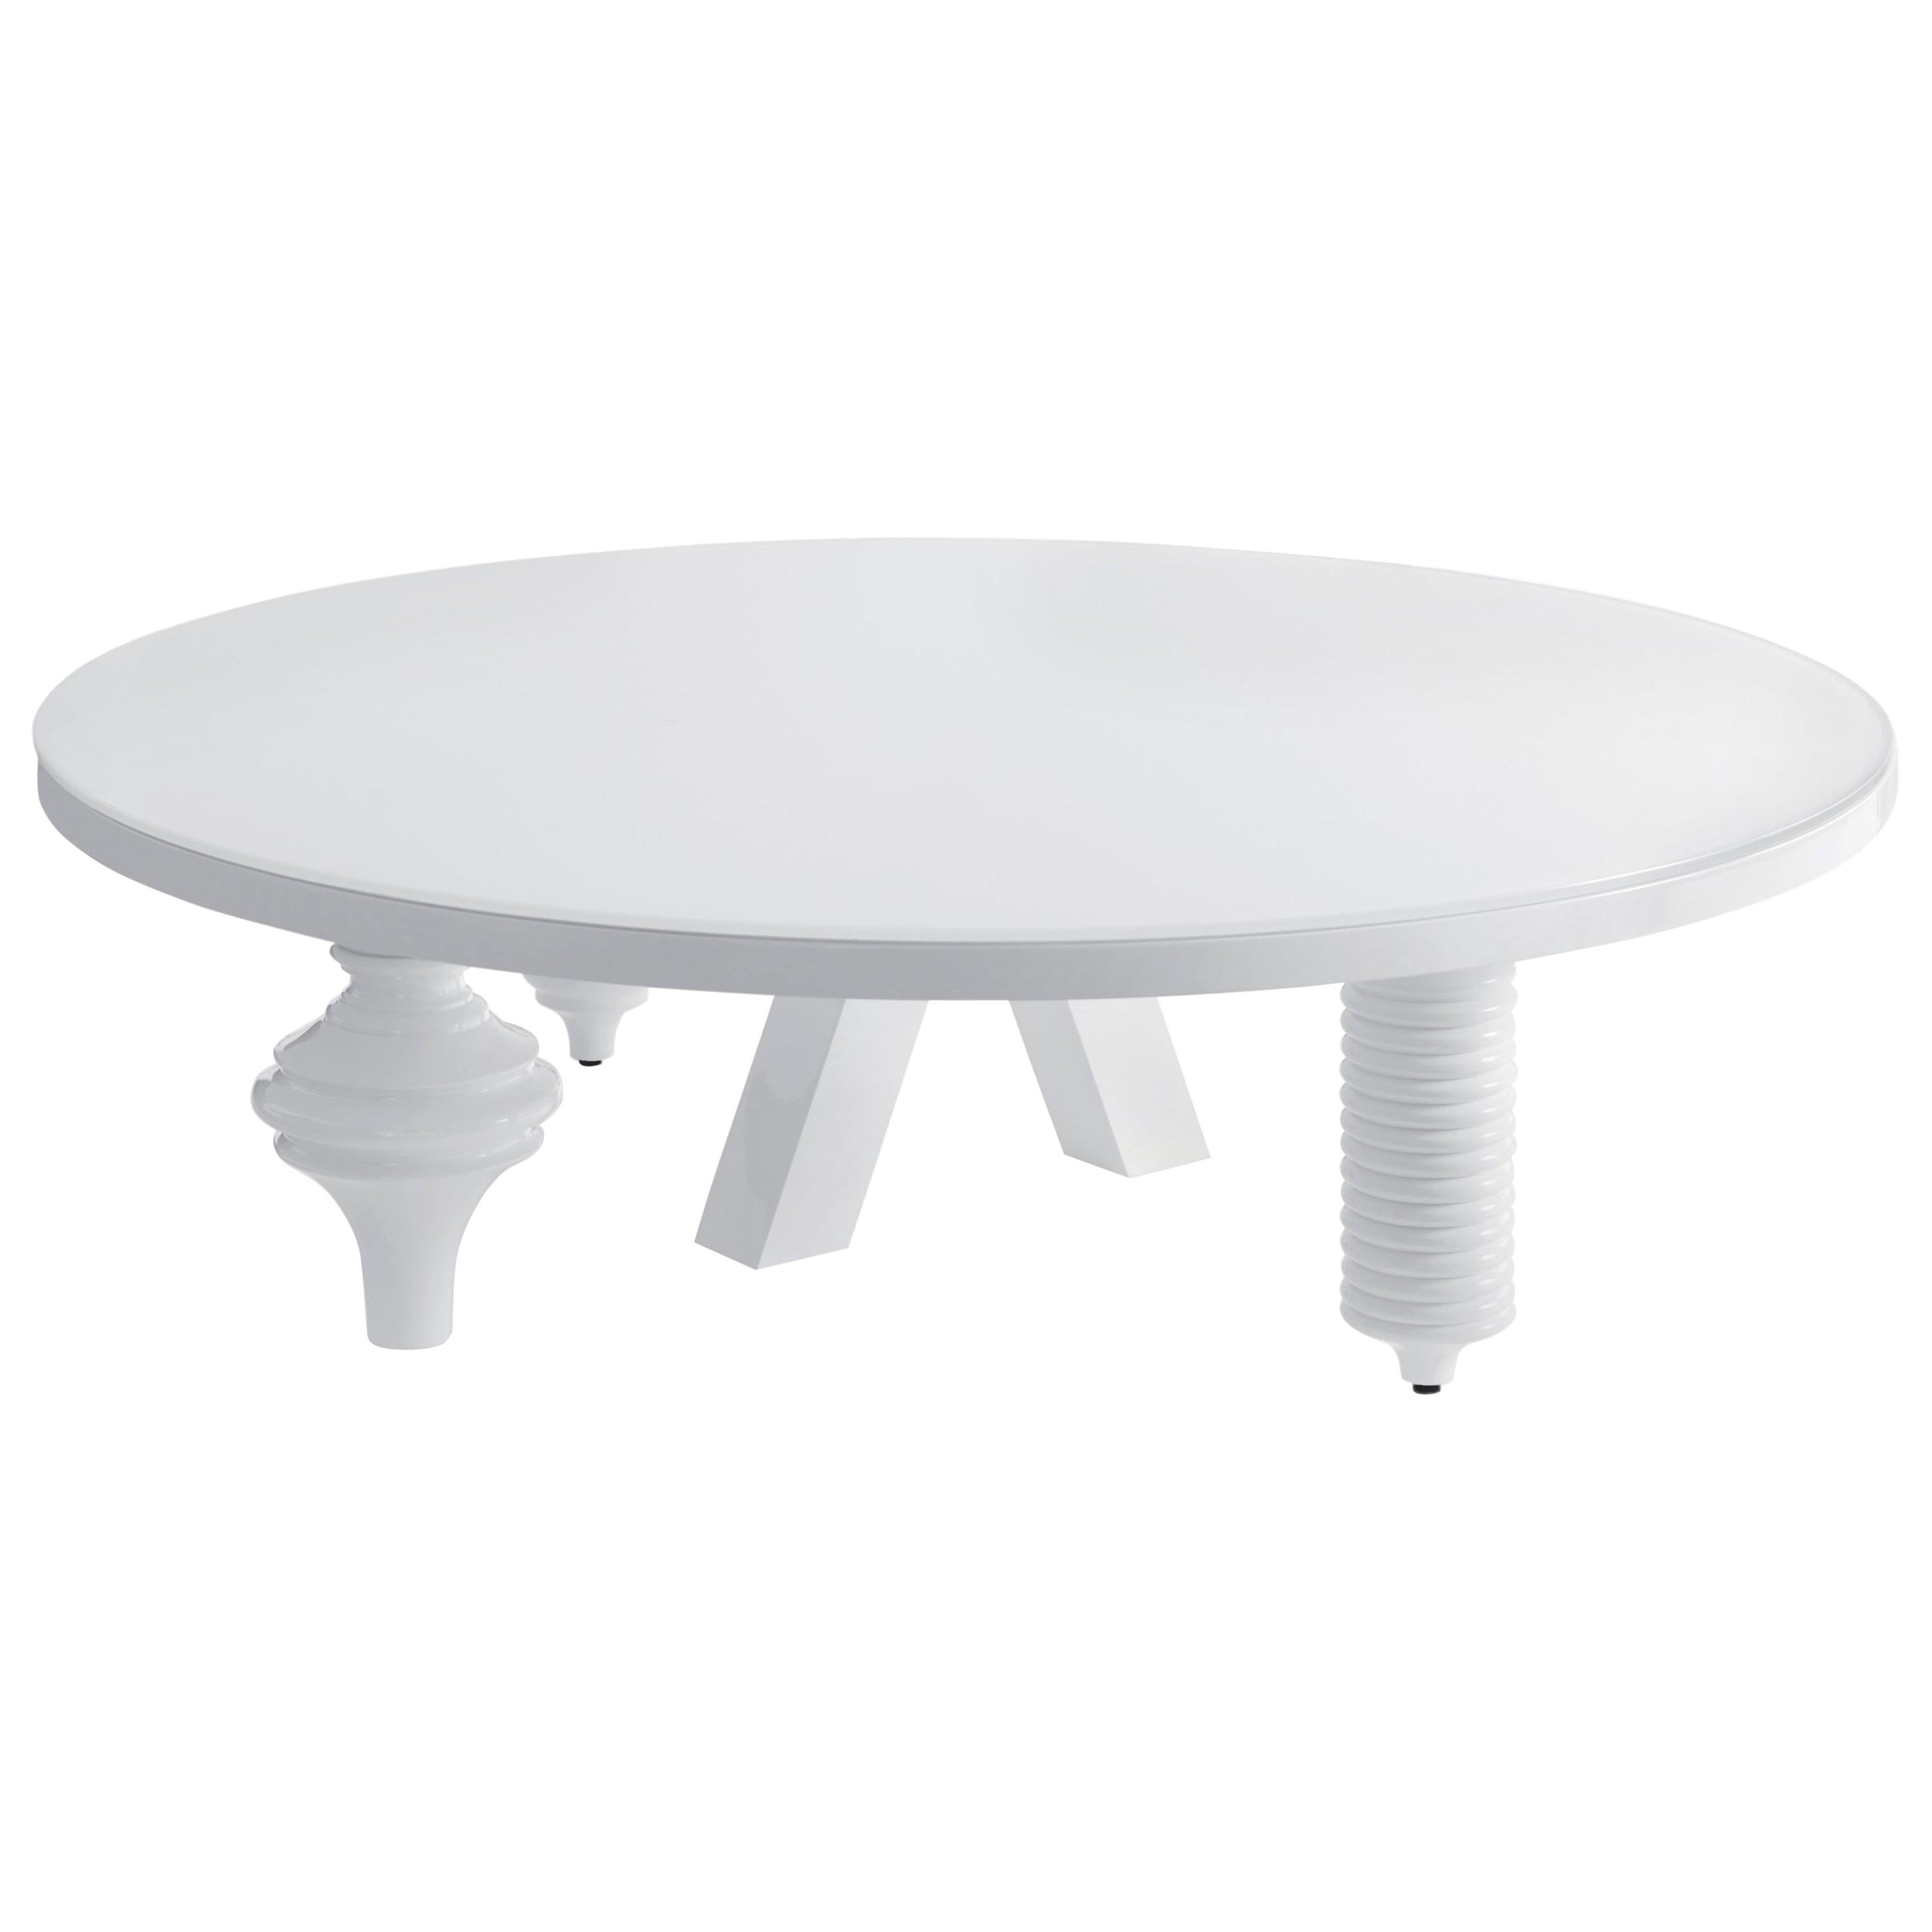 Jaime Hayon White Rounded Multileg White Low Table by BD Barcelona